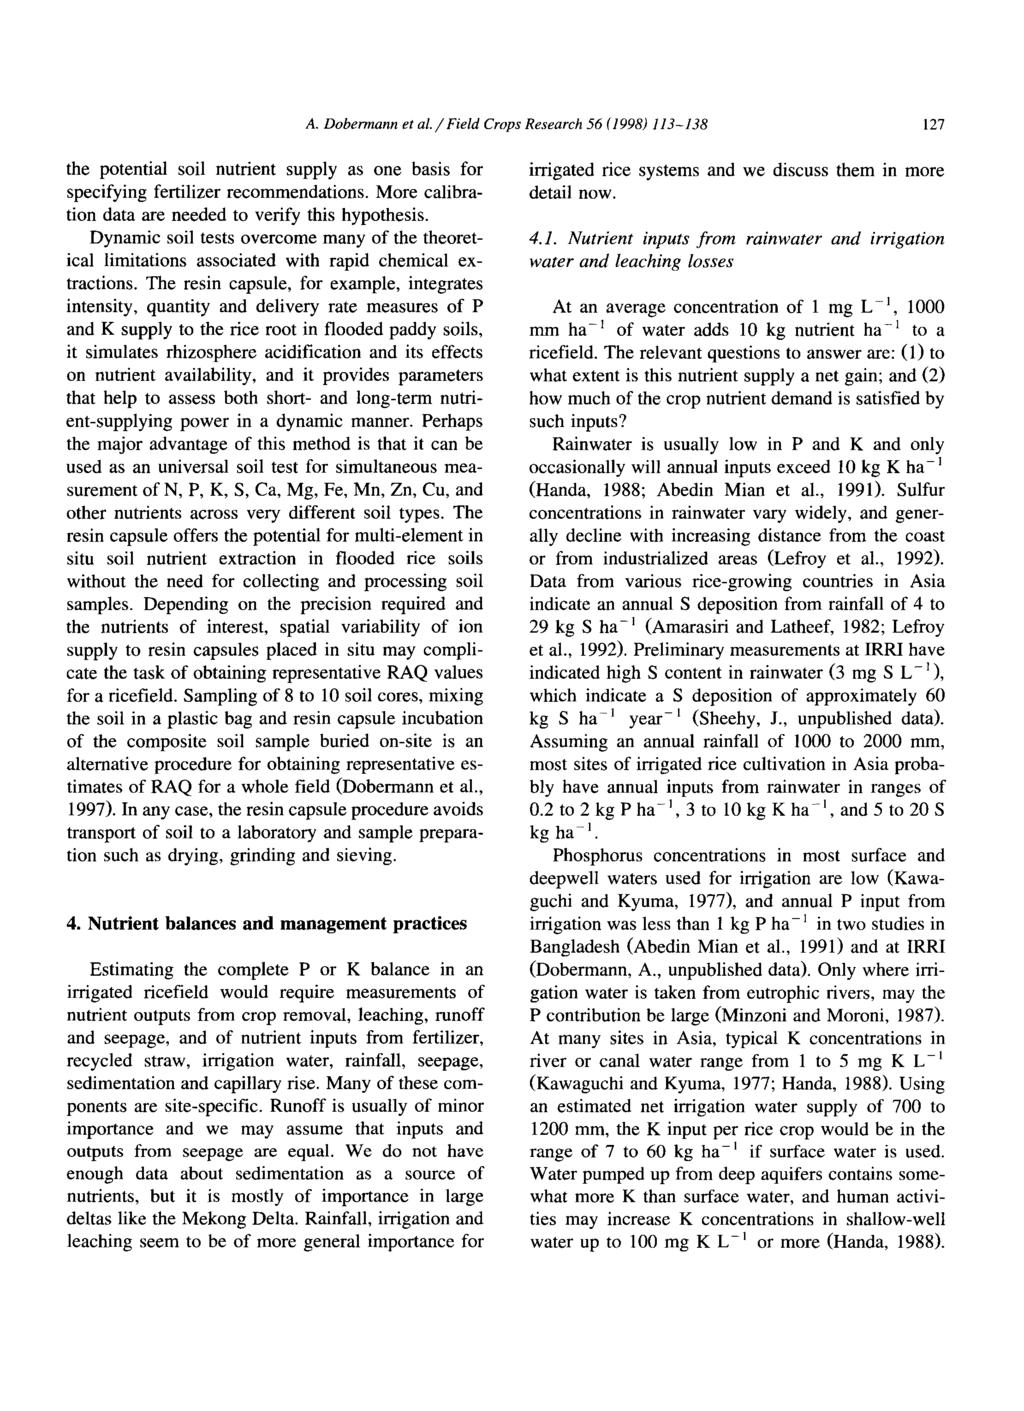 A. Dobermann et al. / Field Crops Research 56 (1998) 113-138 127 the potential soil nutrient supply as one basis for specifying fertilizer recommendations.